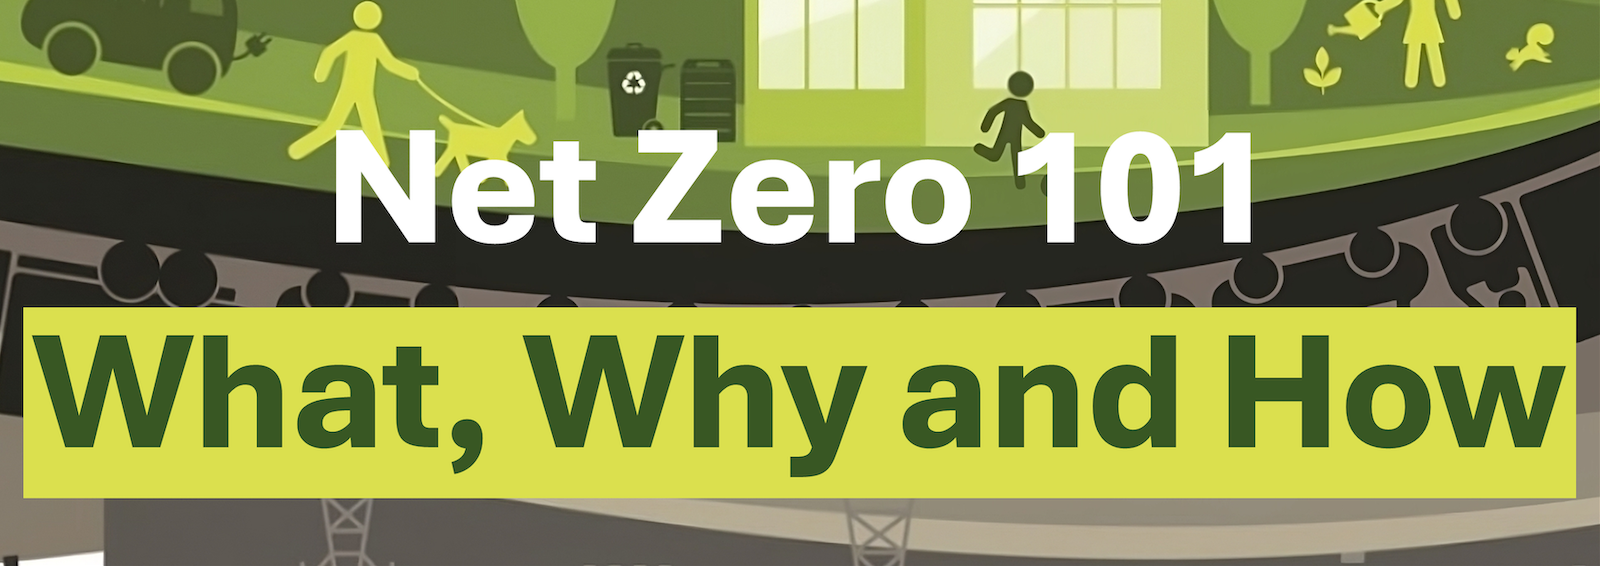 Net Zero 101: What, Why and How